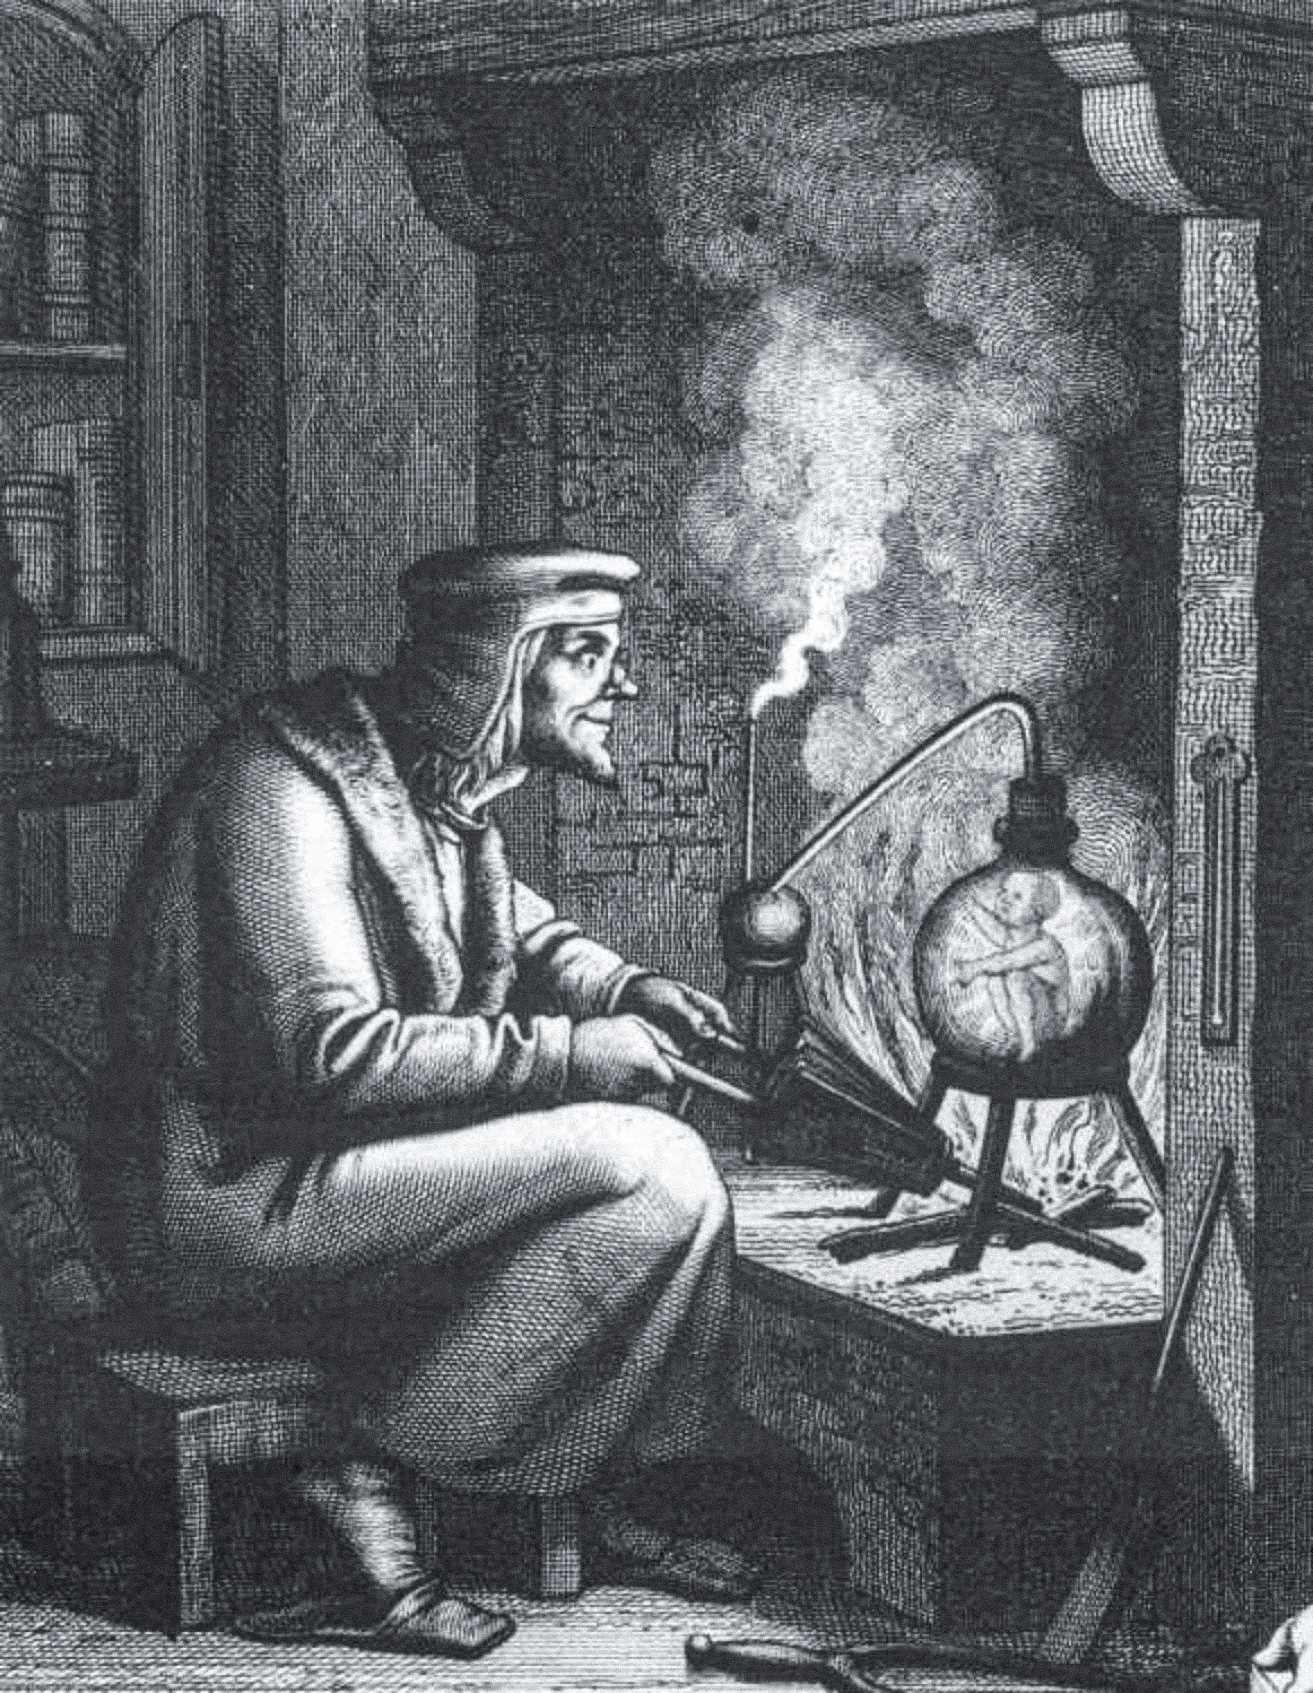 19th century engraving of Homunculus from Goethe's Faust